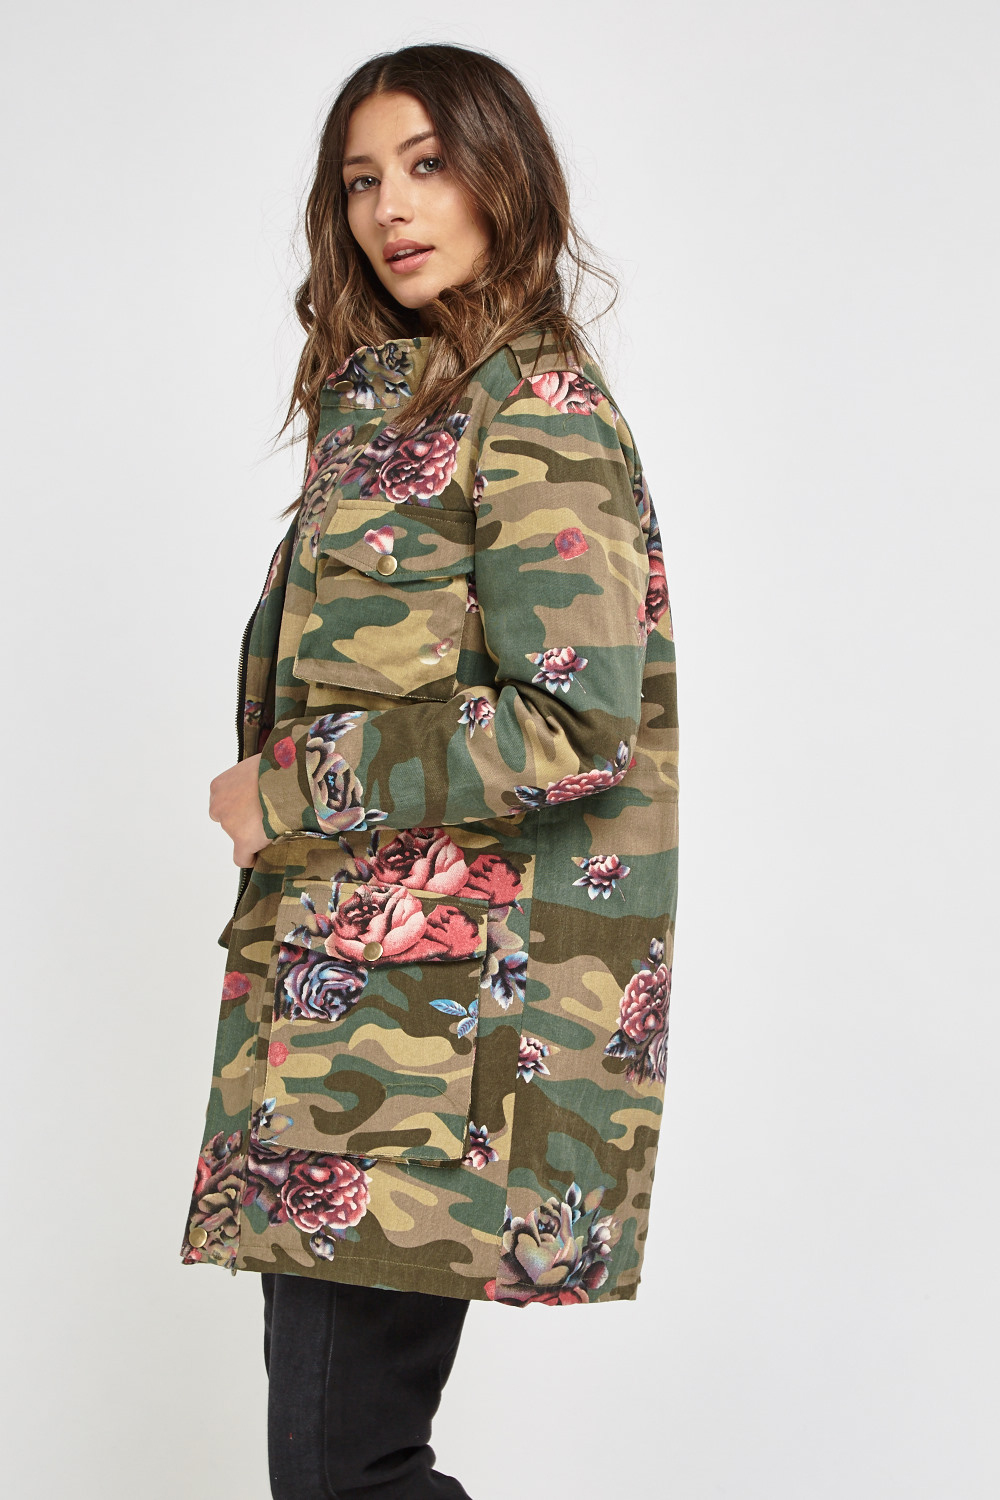 Flower Contrast Camouflage Jacket - Just $7